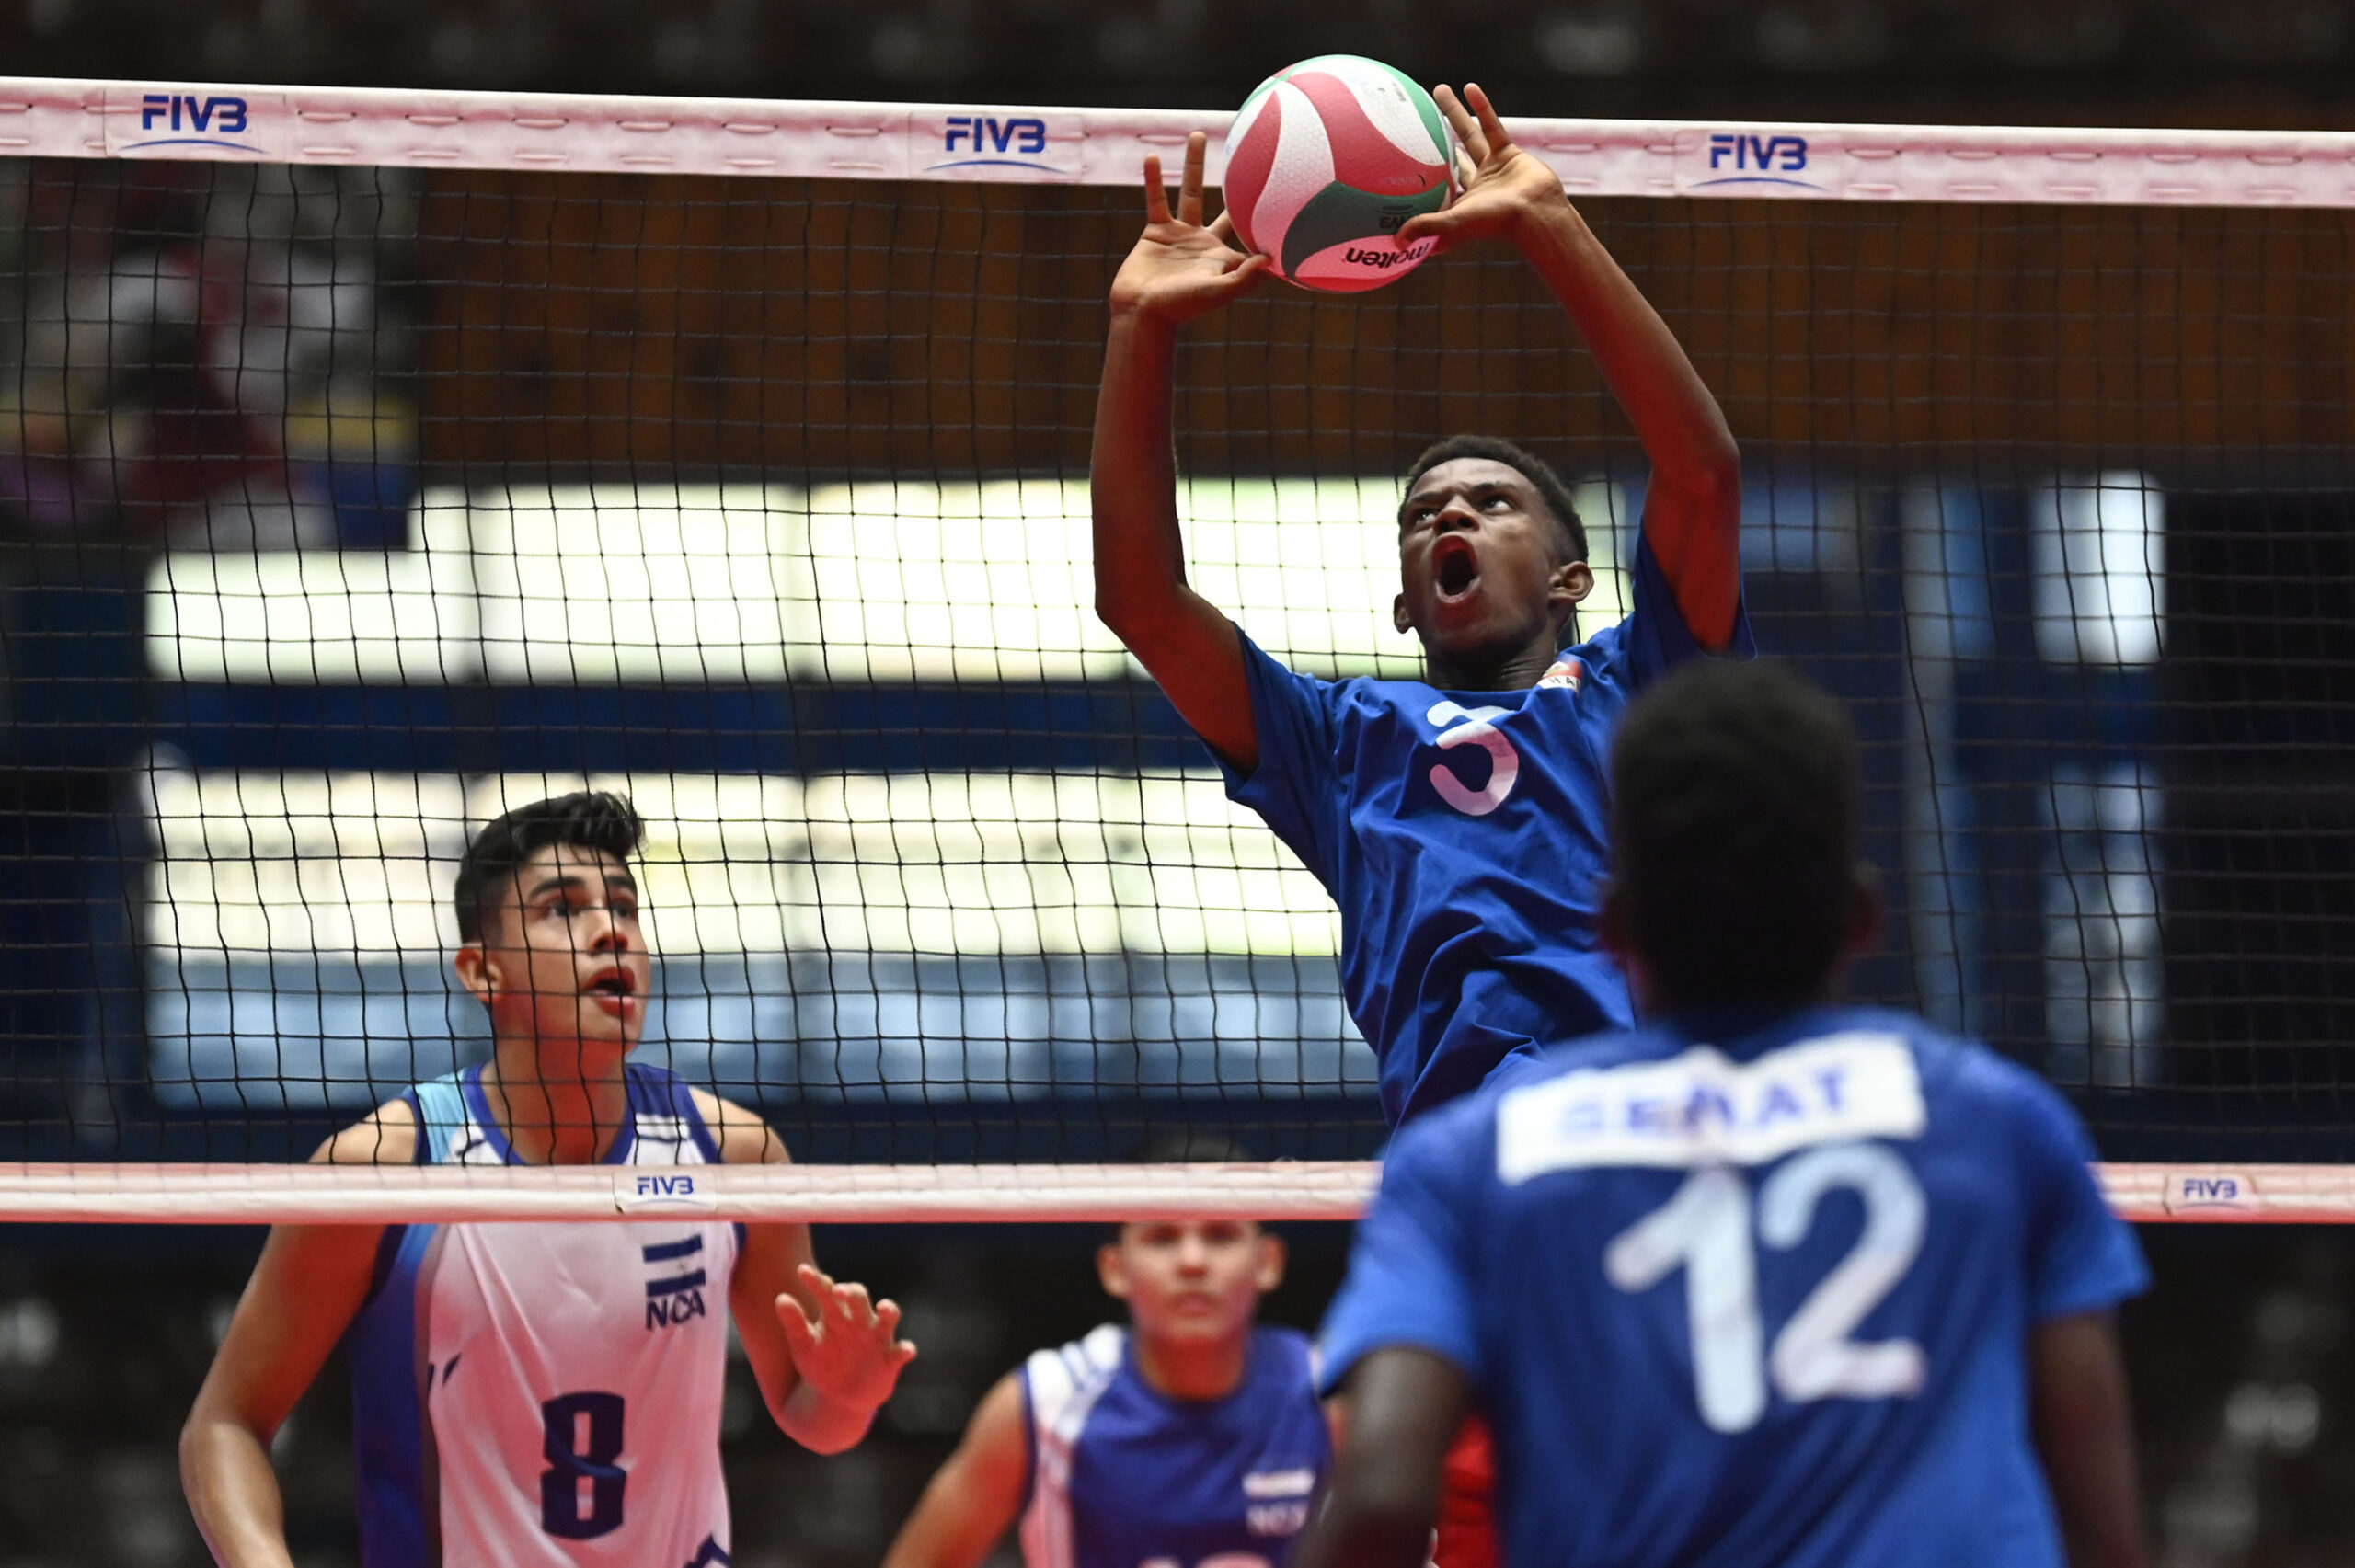 Haiti finished seventh at Men’s U21 Pan American Cup